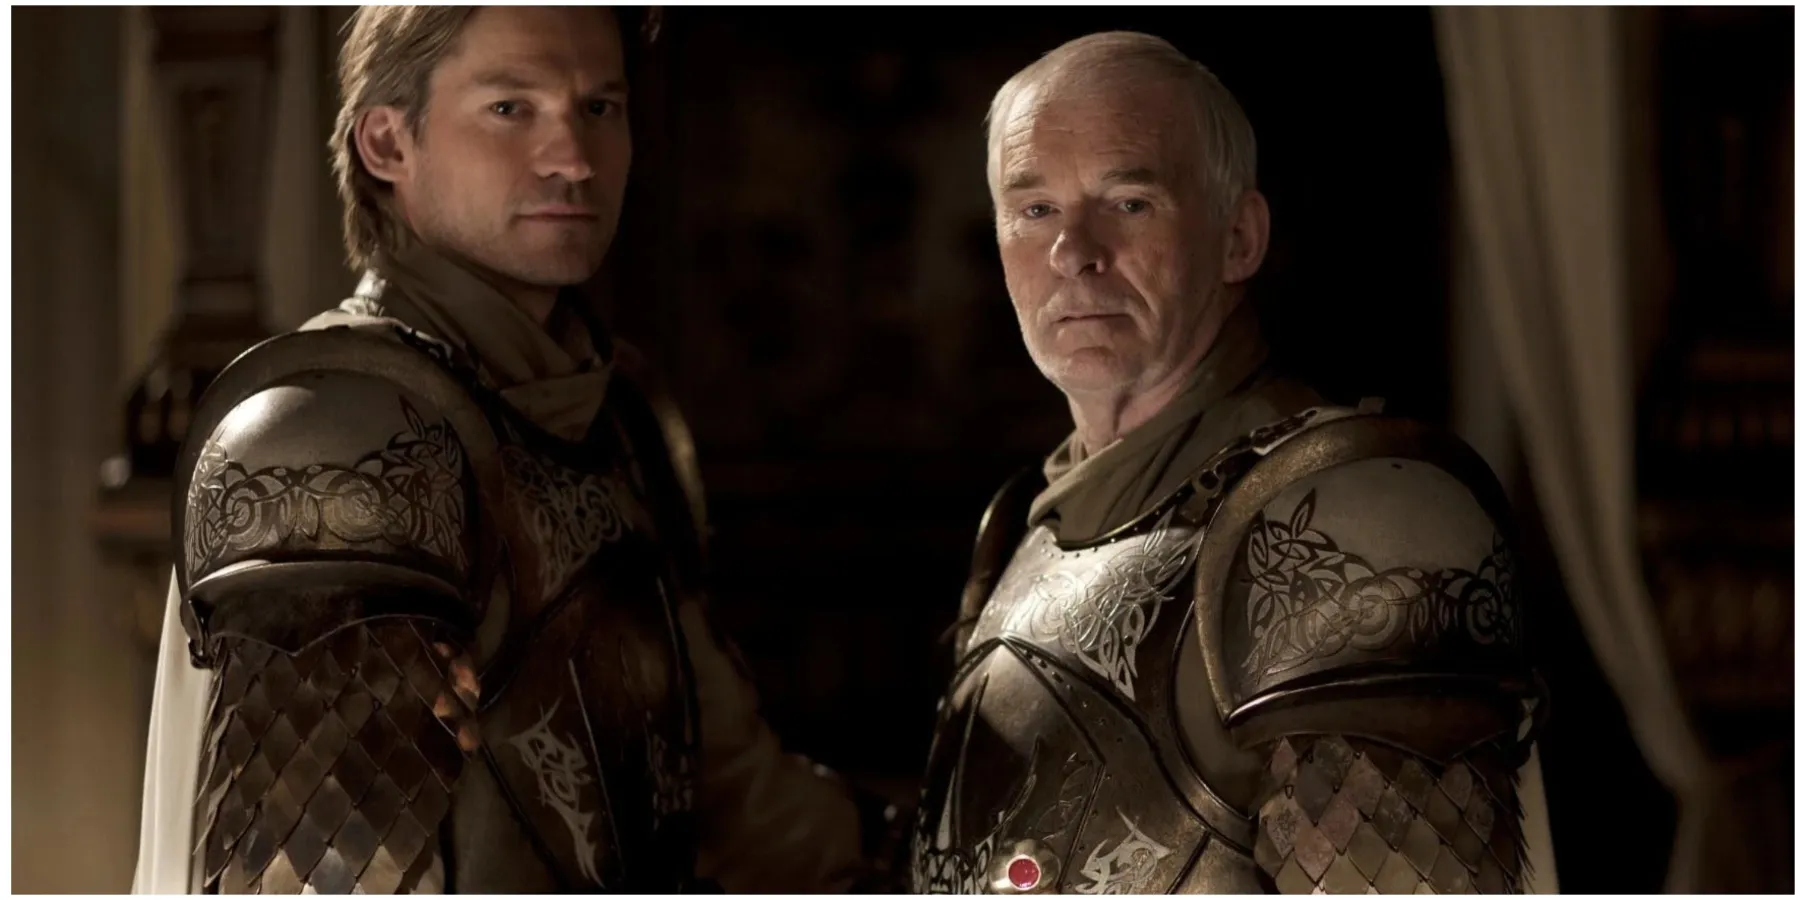 Ser Jaime Lannister and Ser Barristan Selmy in Game of Thrones